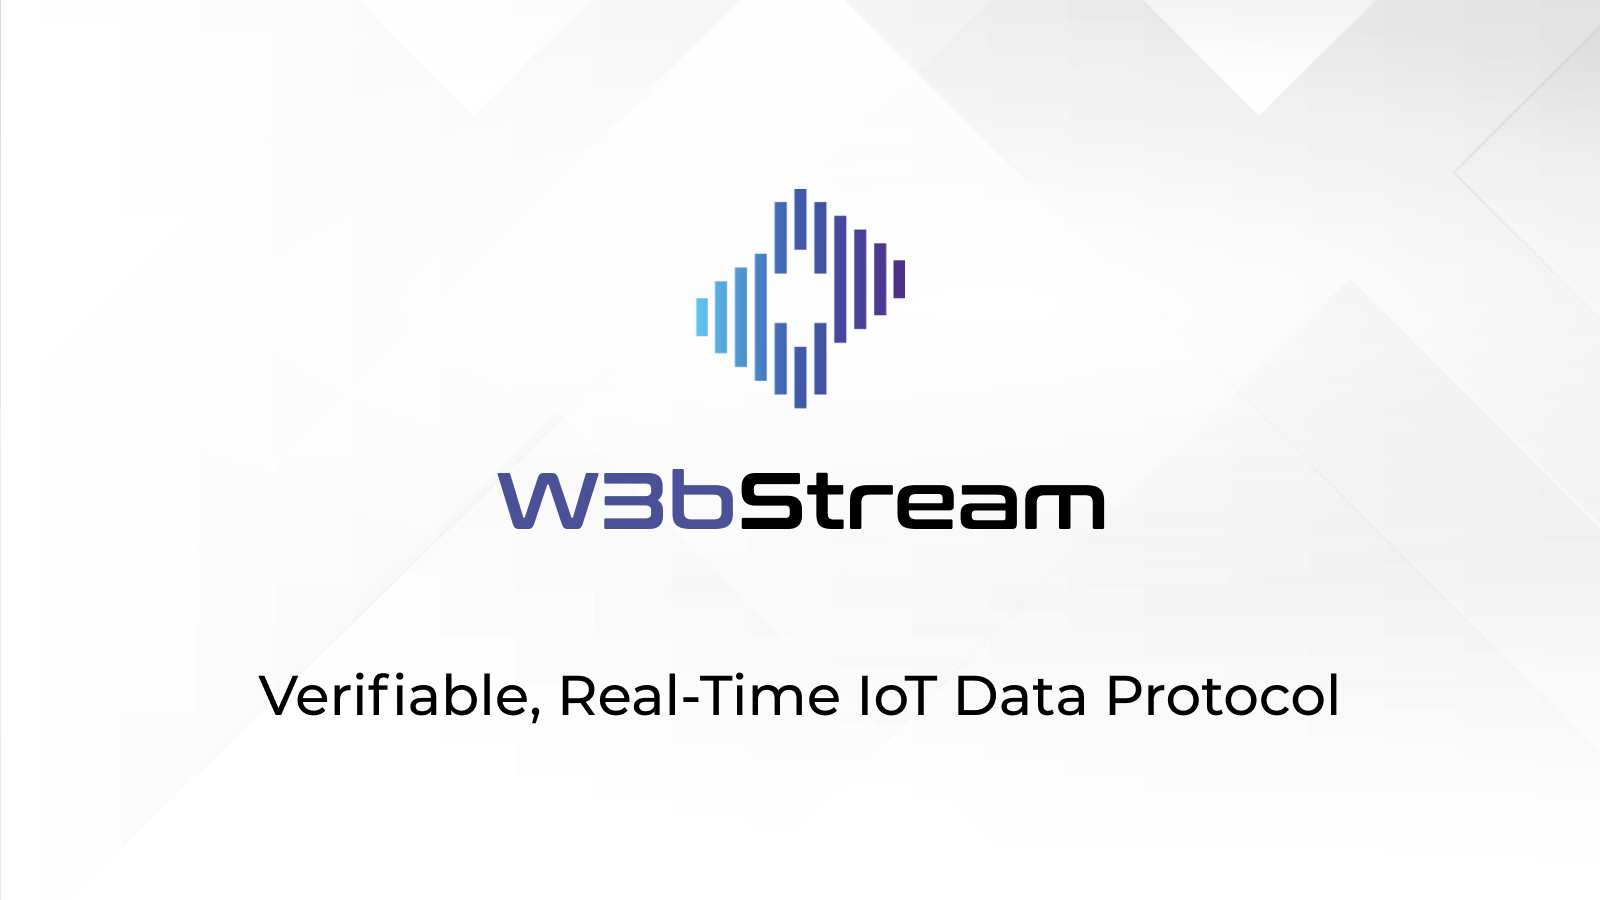 Introducing W3bstream: A Protocol for Verifiable, Real-Time IoT Data